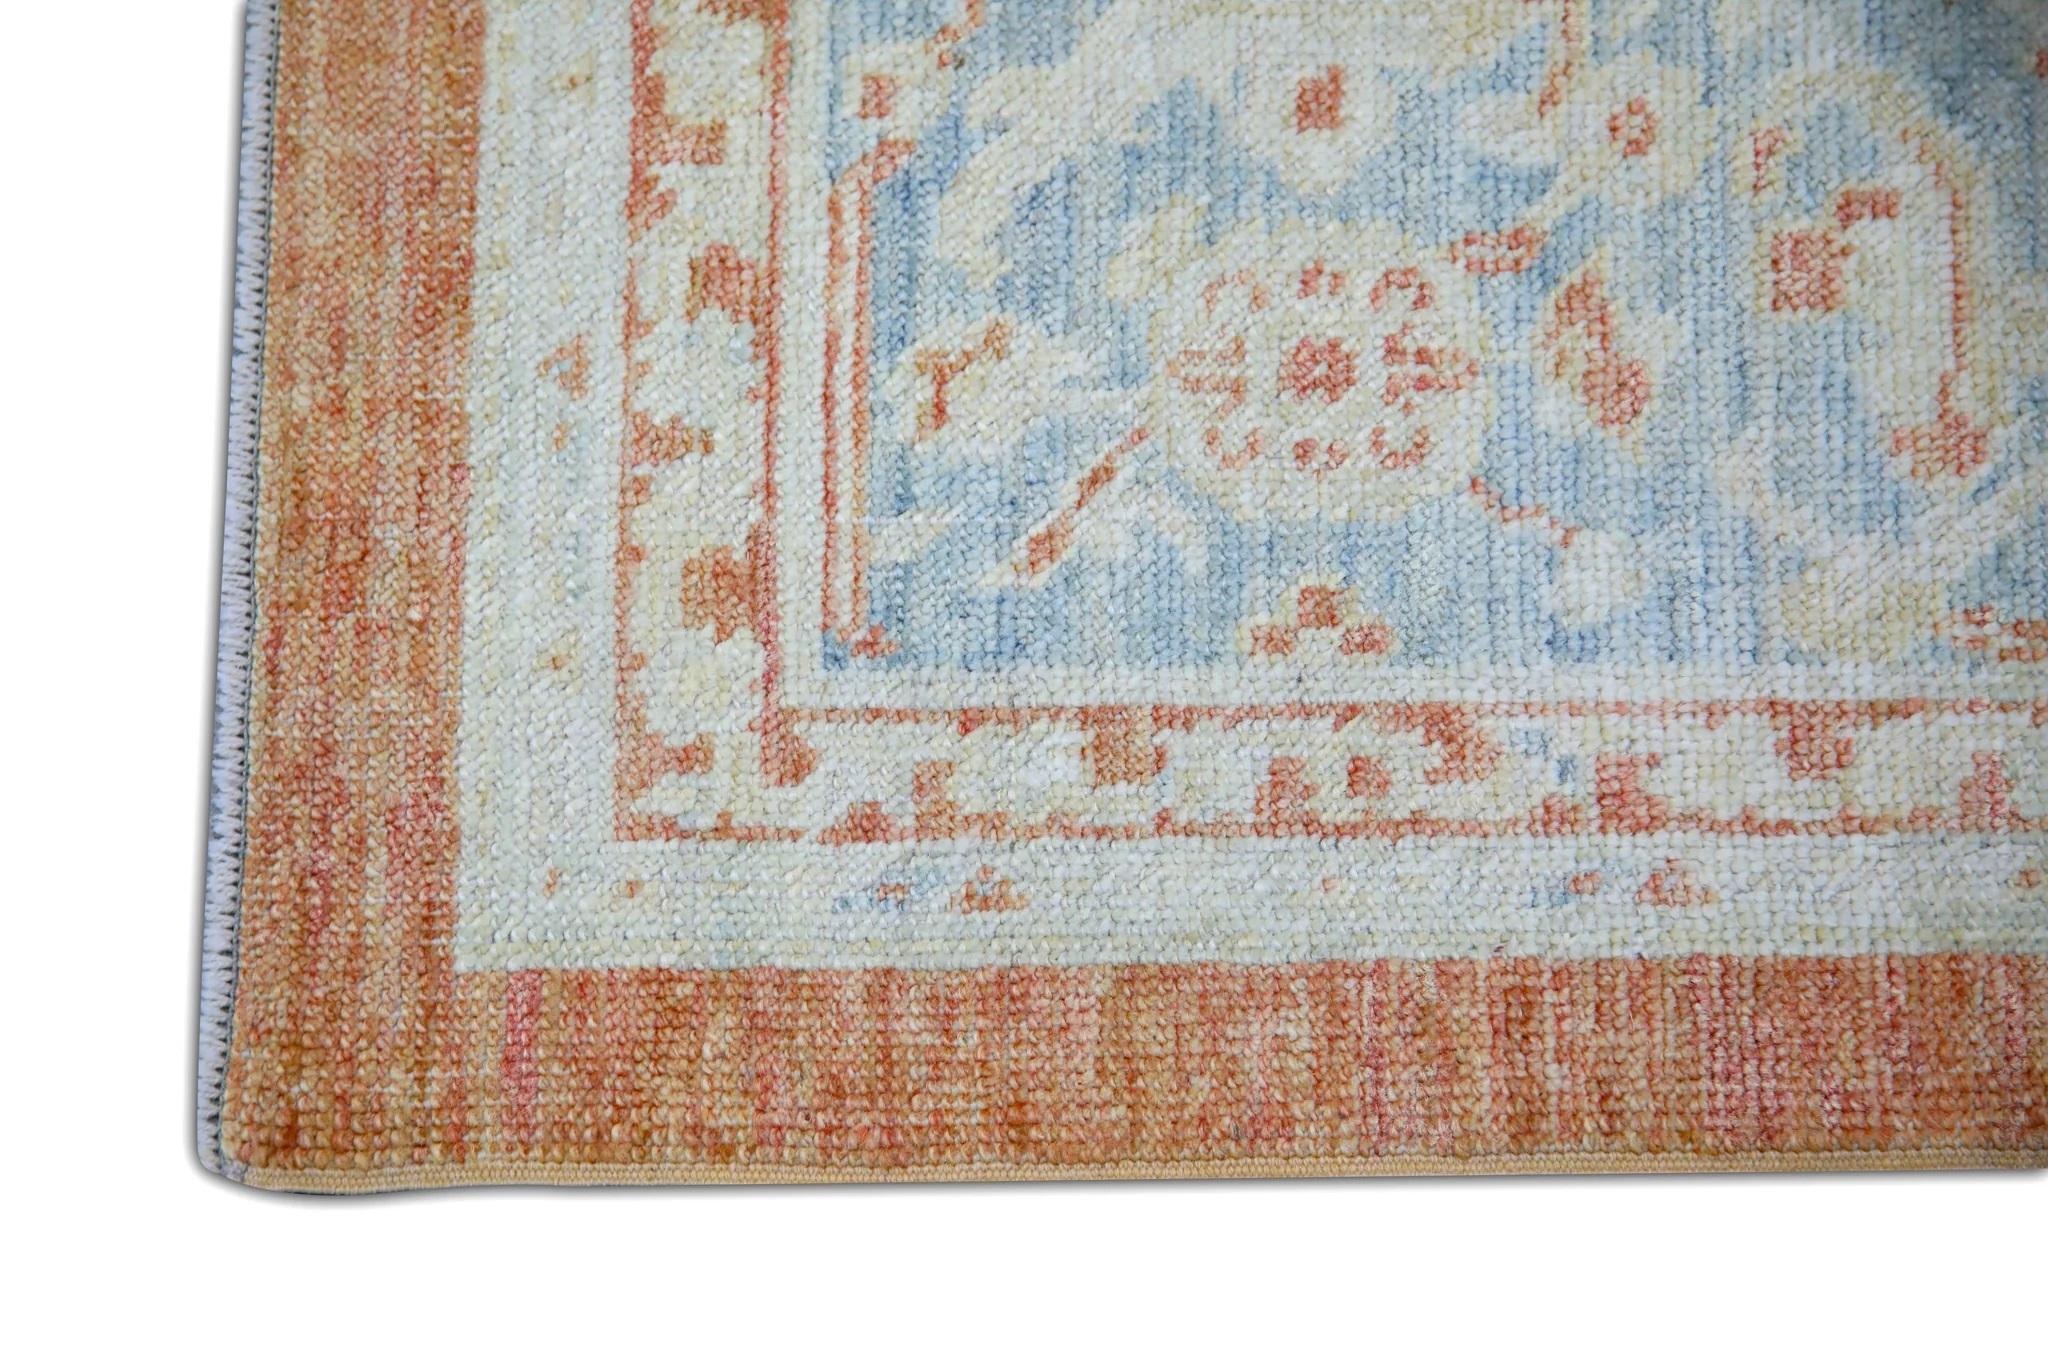 Vegetable Dyed Floral Turkish Finewoven Wool Oushak Rug in Salmon Pink and Baby Blue 6'2